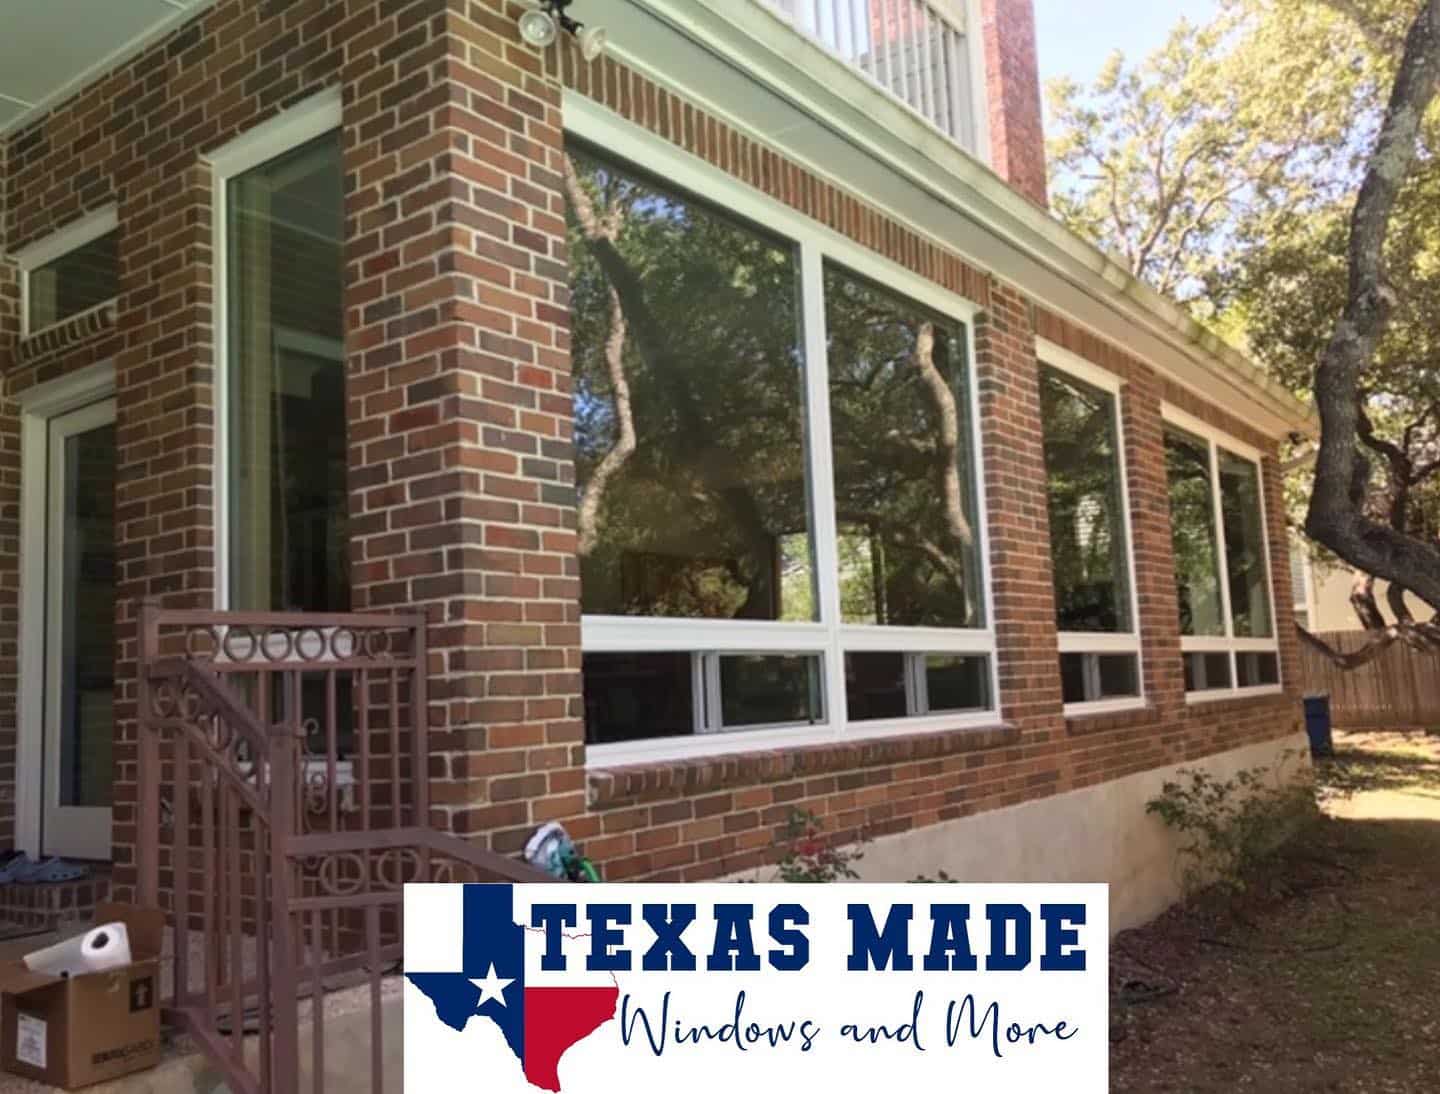 Renovated brick home in San Antonio with new, clear windows enhancing natural light and curb appeal.